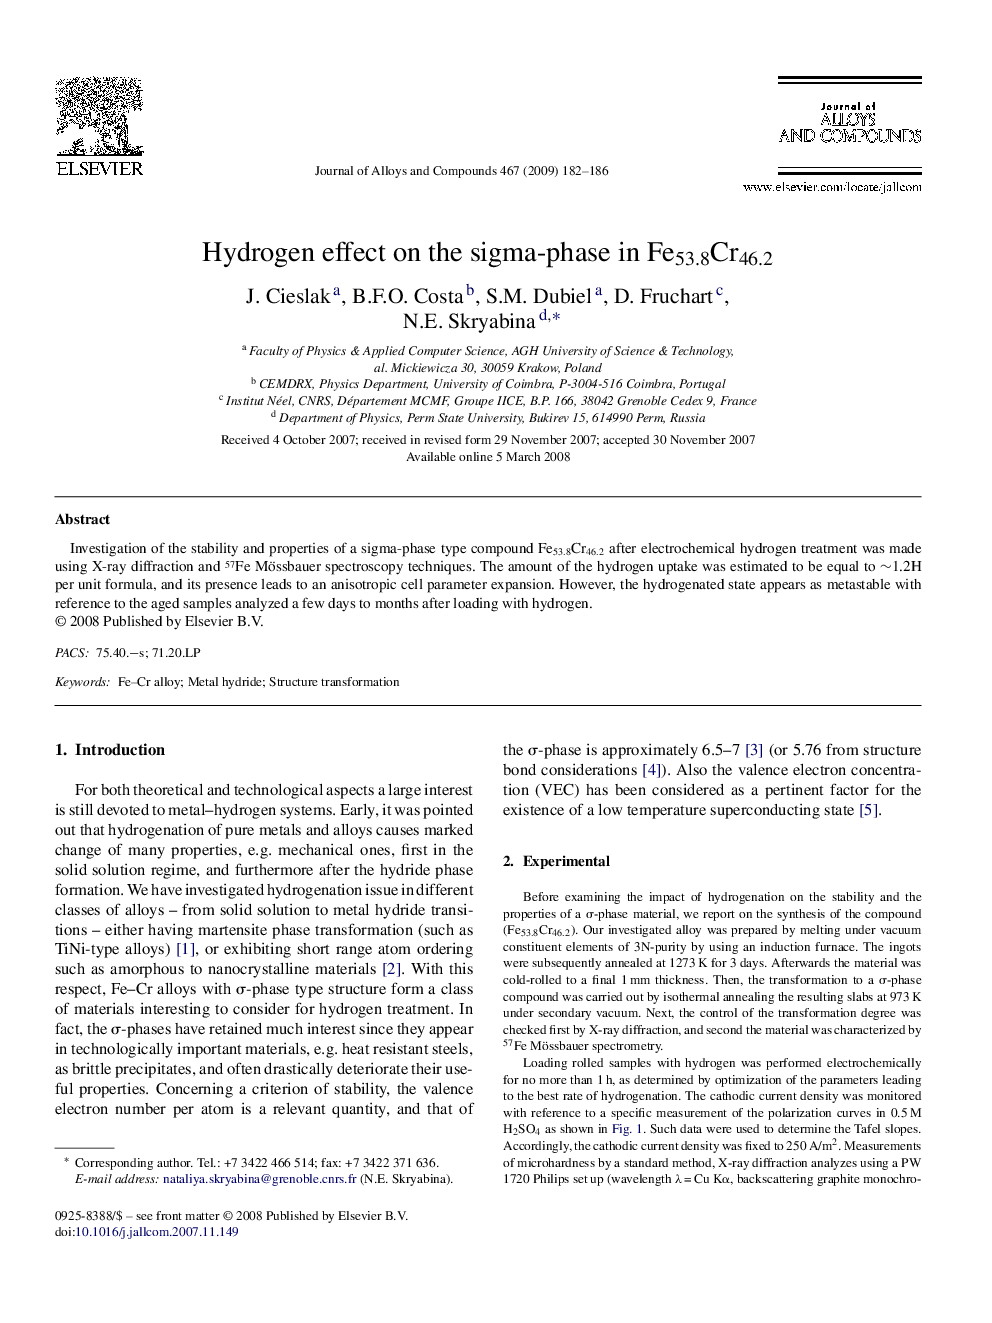 Hydrogen effect on the sigma-phase in Fe53.8Cr46.2